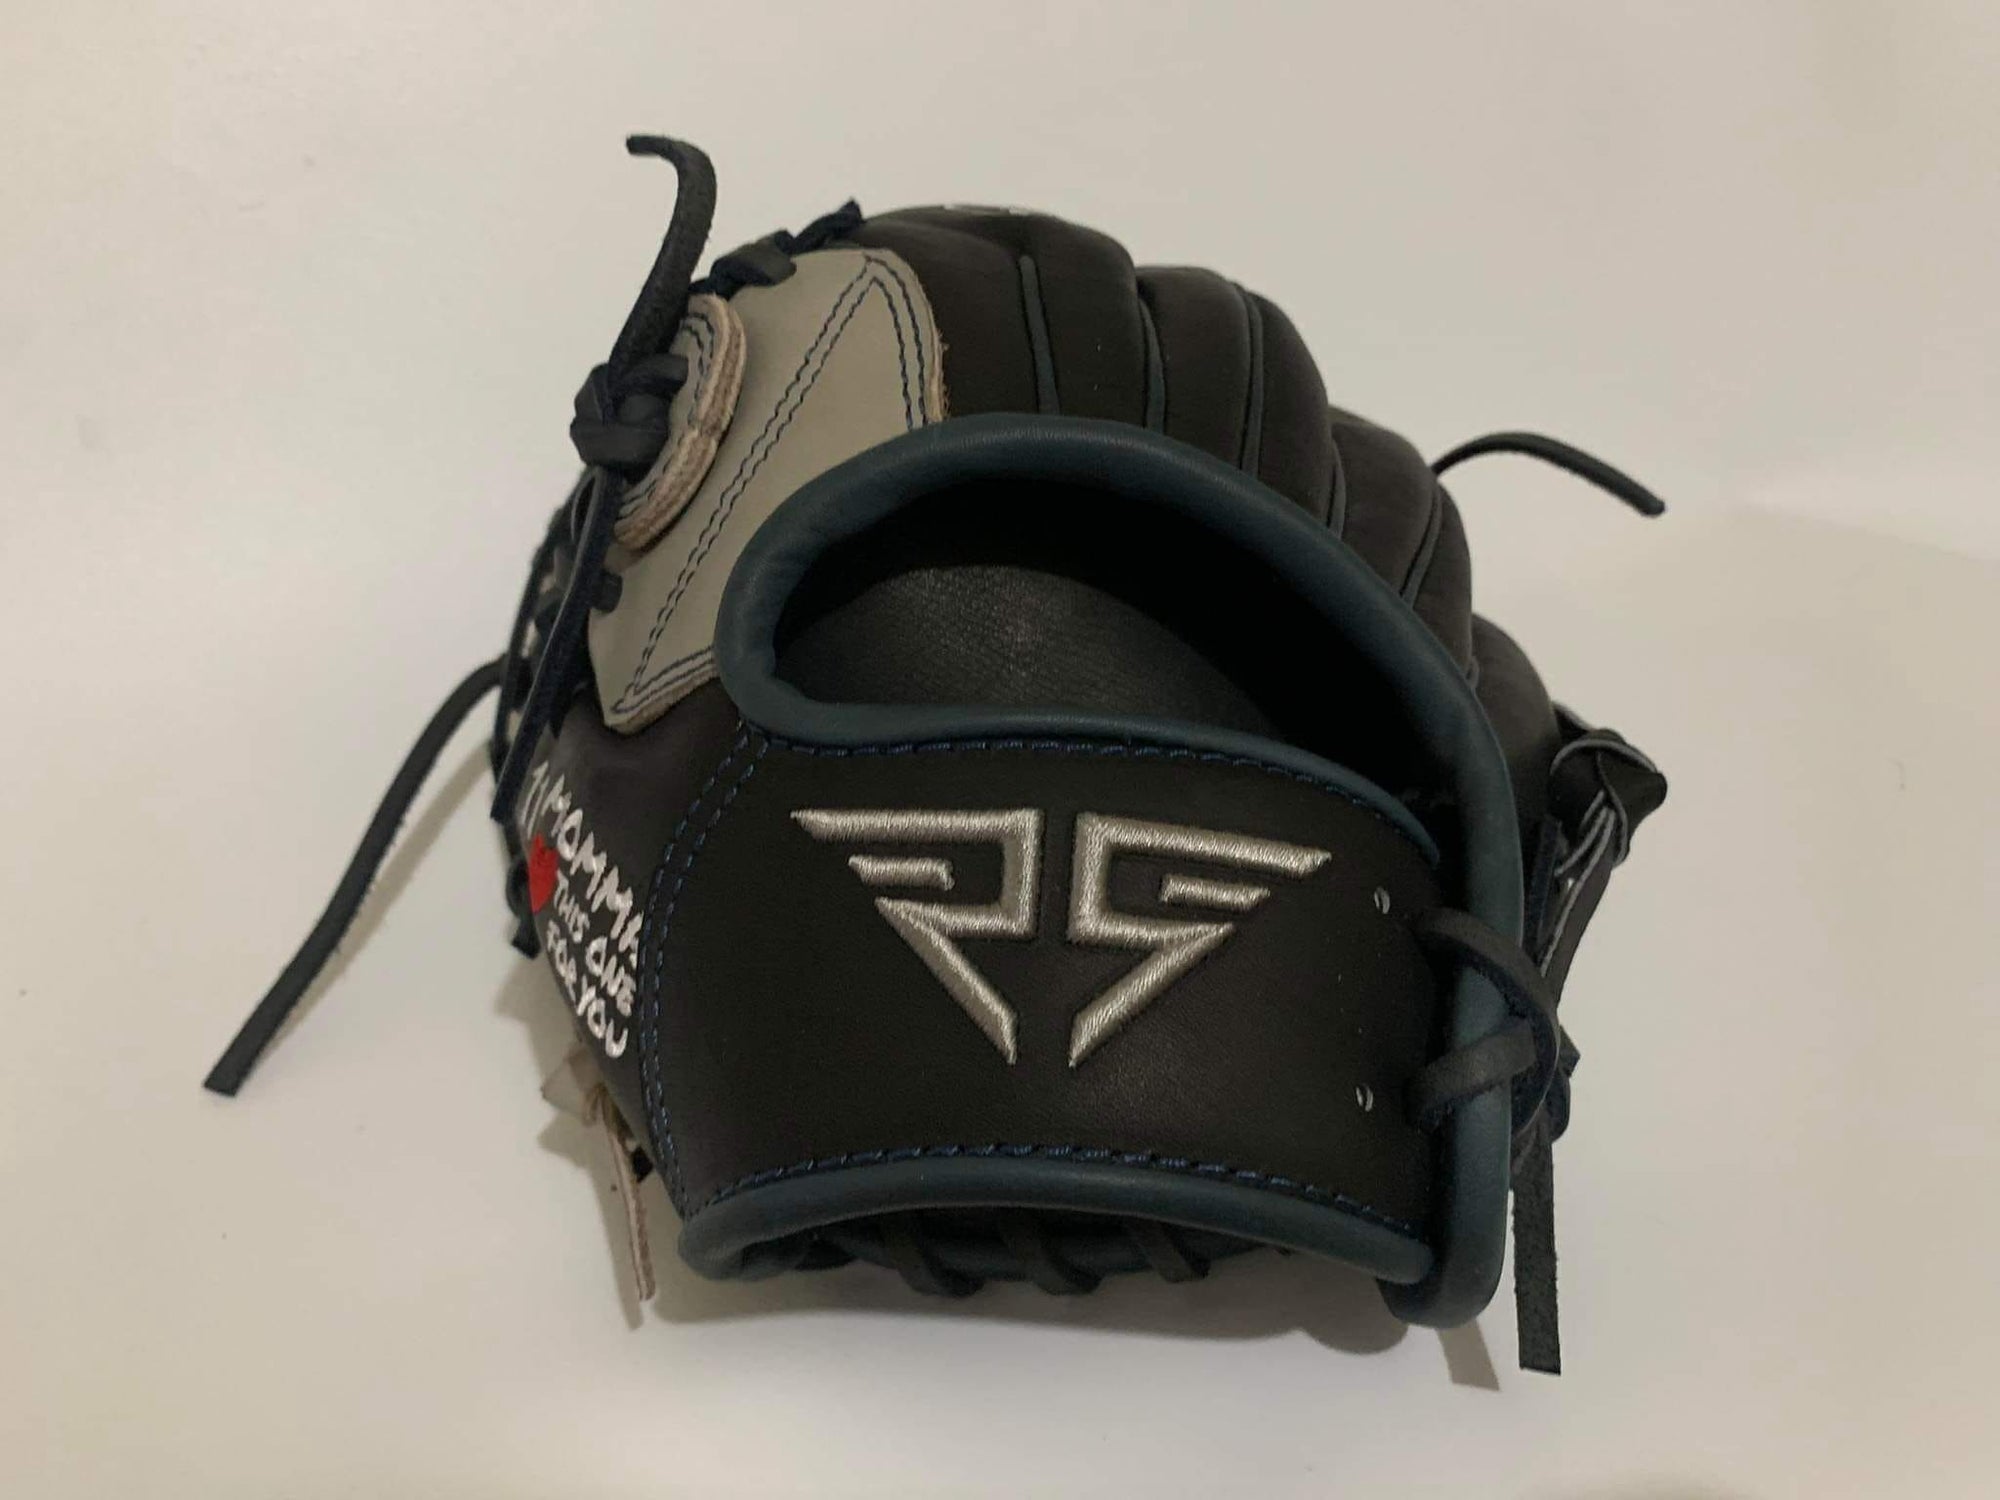 Why Athletes Love Our Baseball Gloves